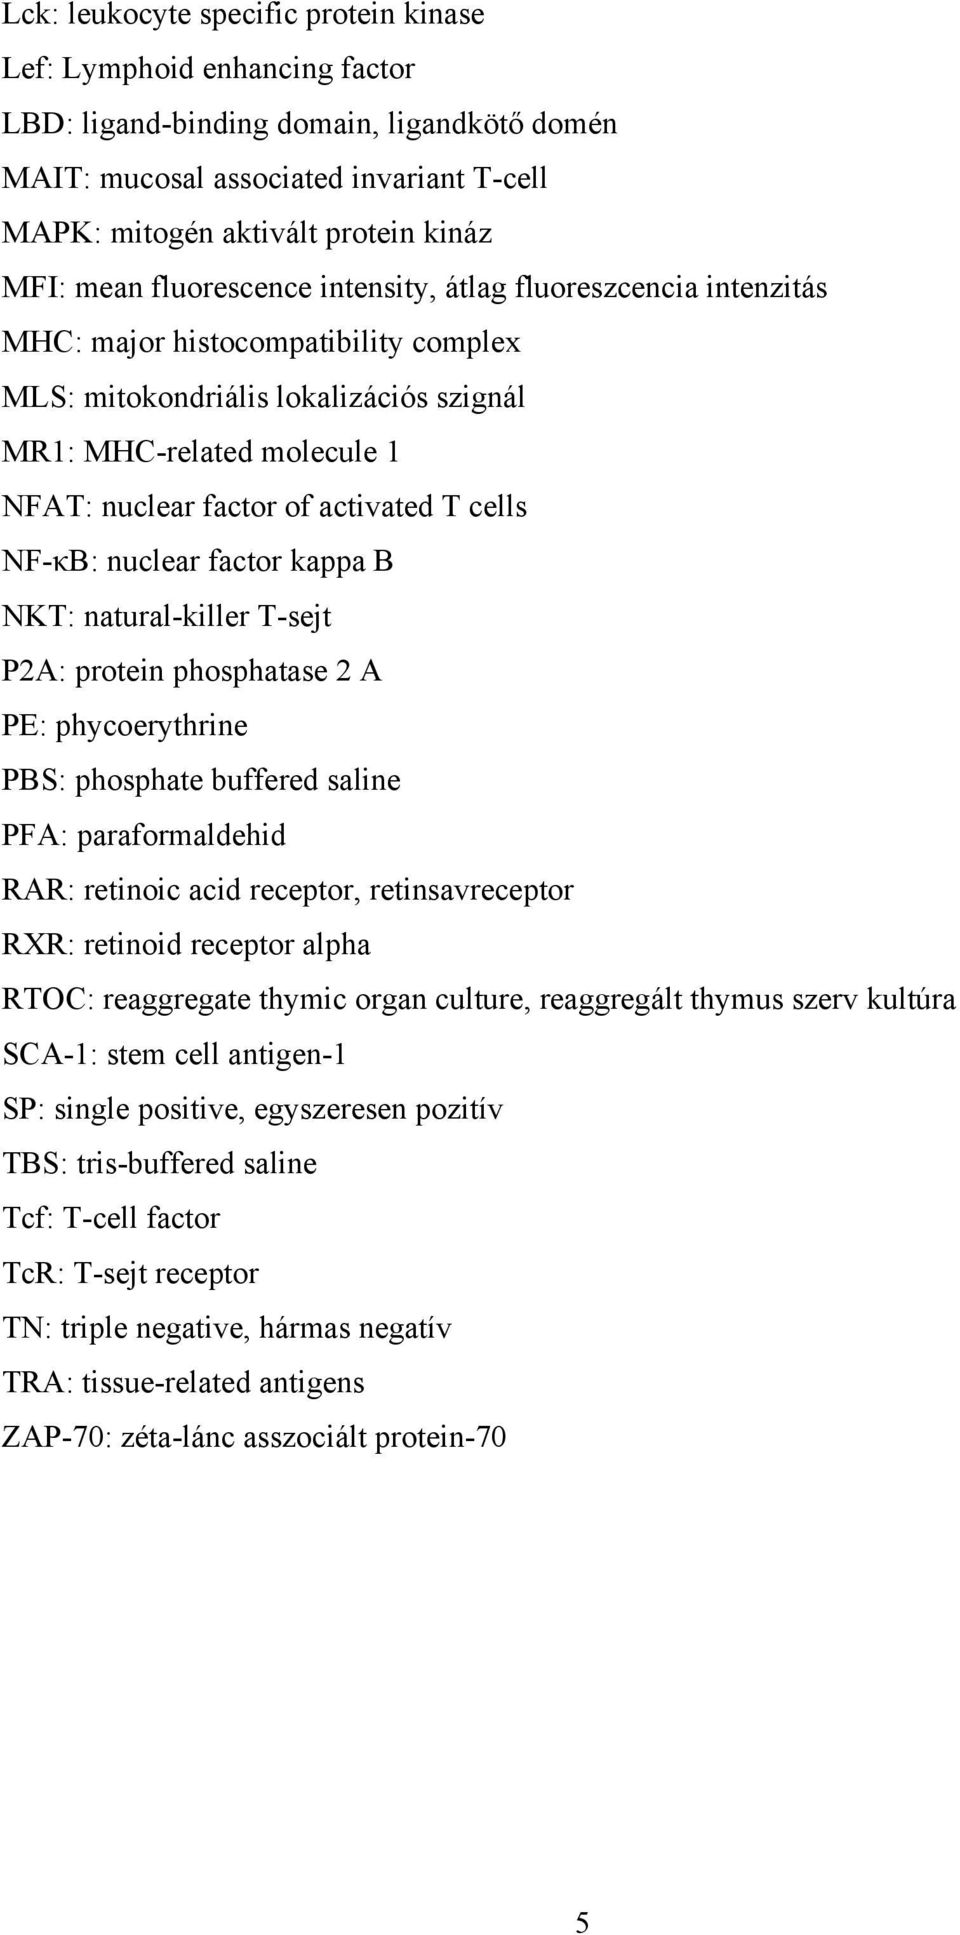 activated T cells NF-κB: nuclear factor kappa B NKT: natural-killer T-sejt P2A: protein phosphatase 2 A PE: phycoerythrine PBS: phosphate buffered saline PFA: paraformaldehid RAR: retinoic acid